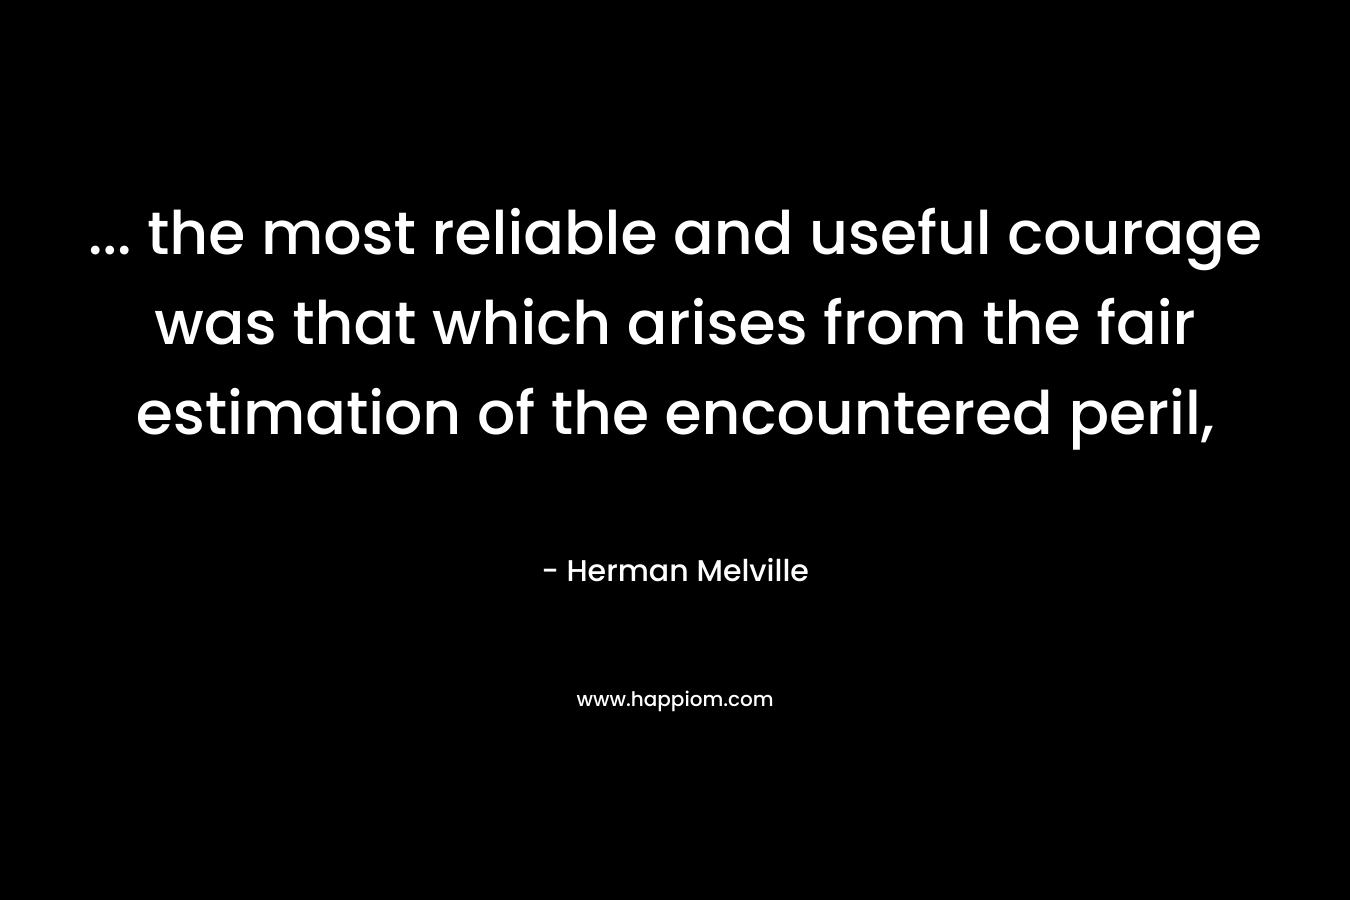 … the most reliable and useful courage was that which arises from the fair estimation of the encountered peril, – Herman Melville